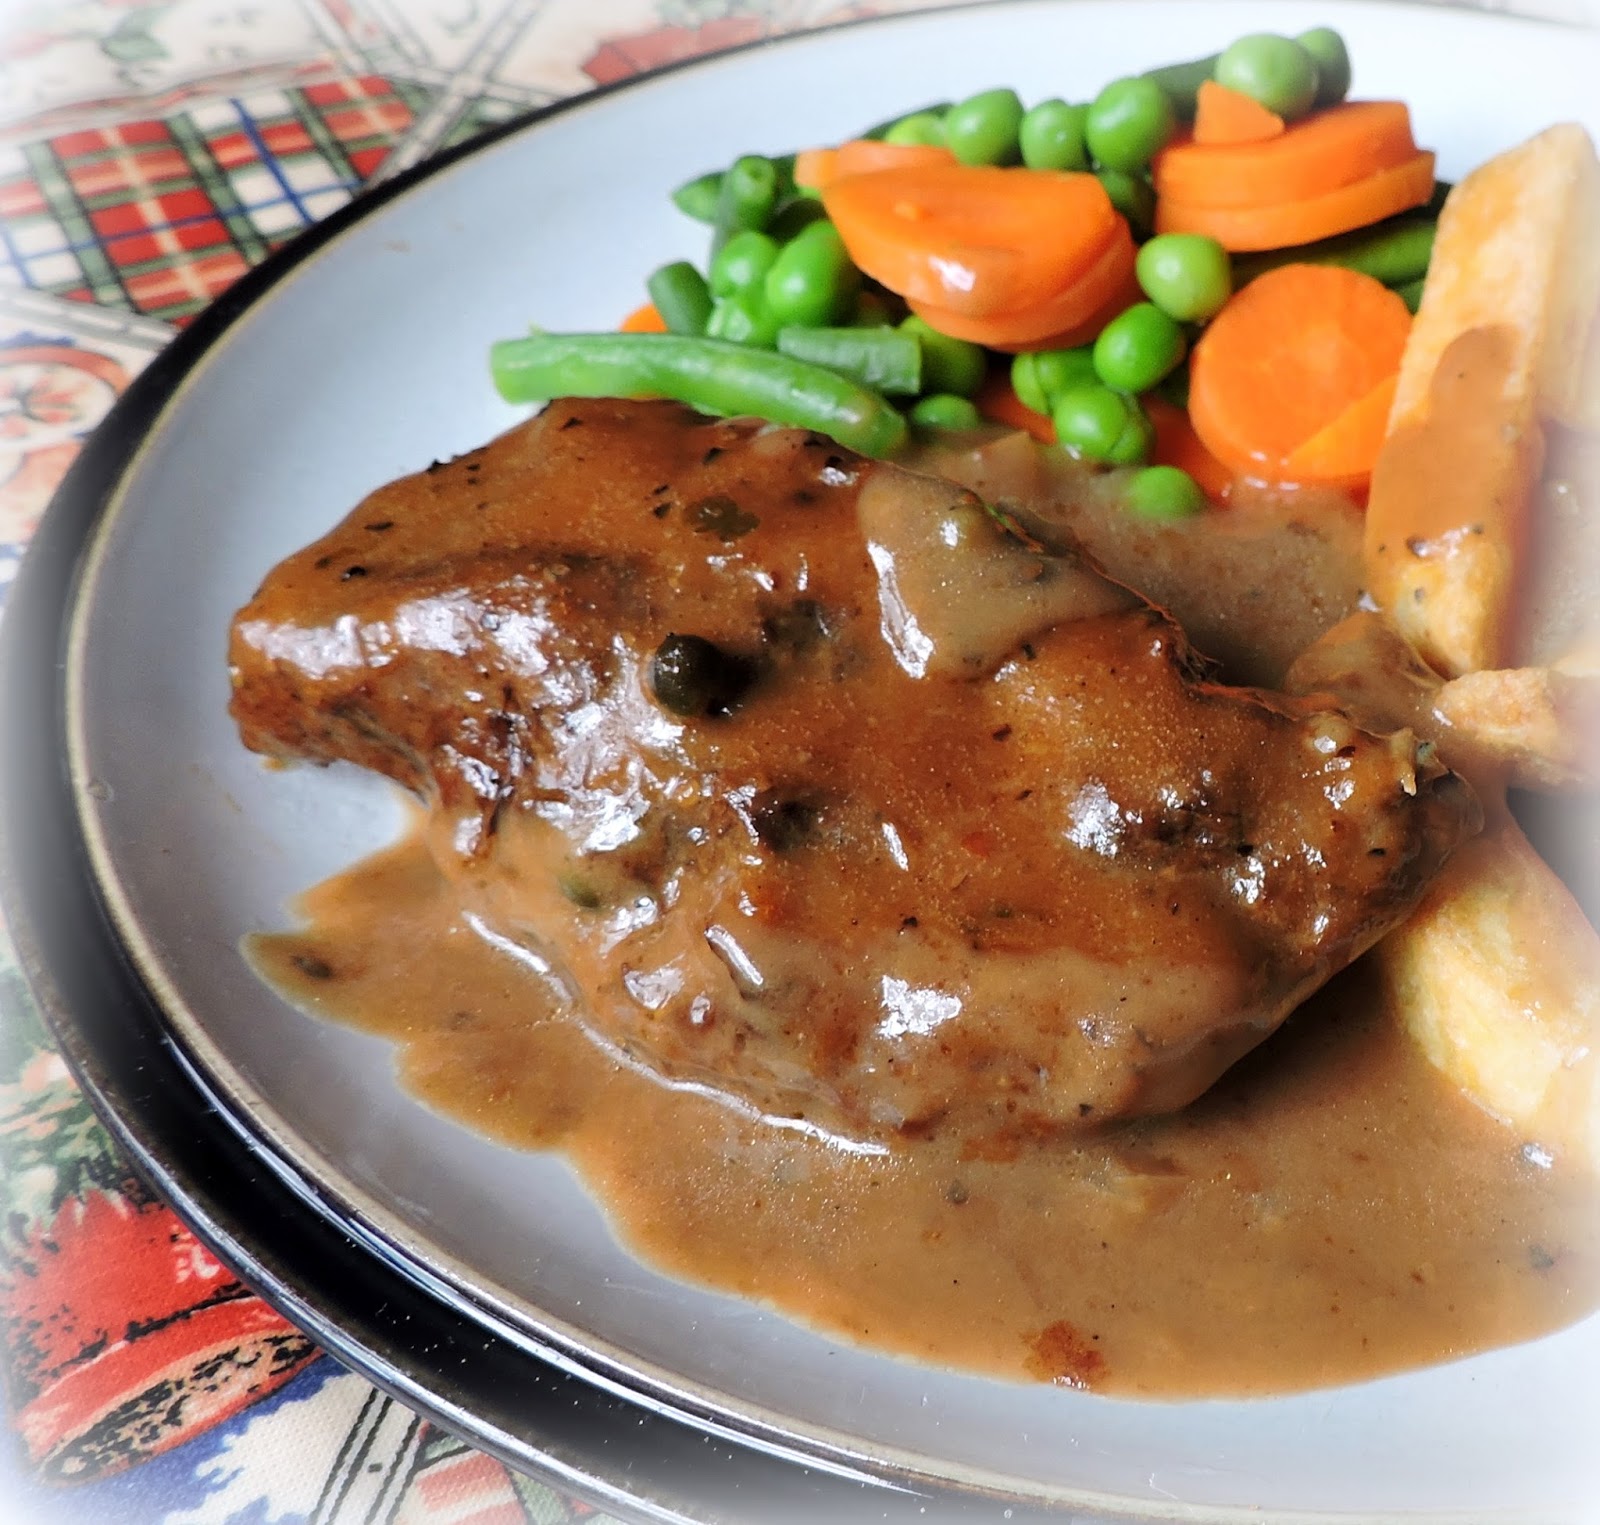 Braised Beef with a Peppercorn Sauce | The English Kitchen